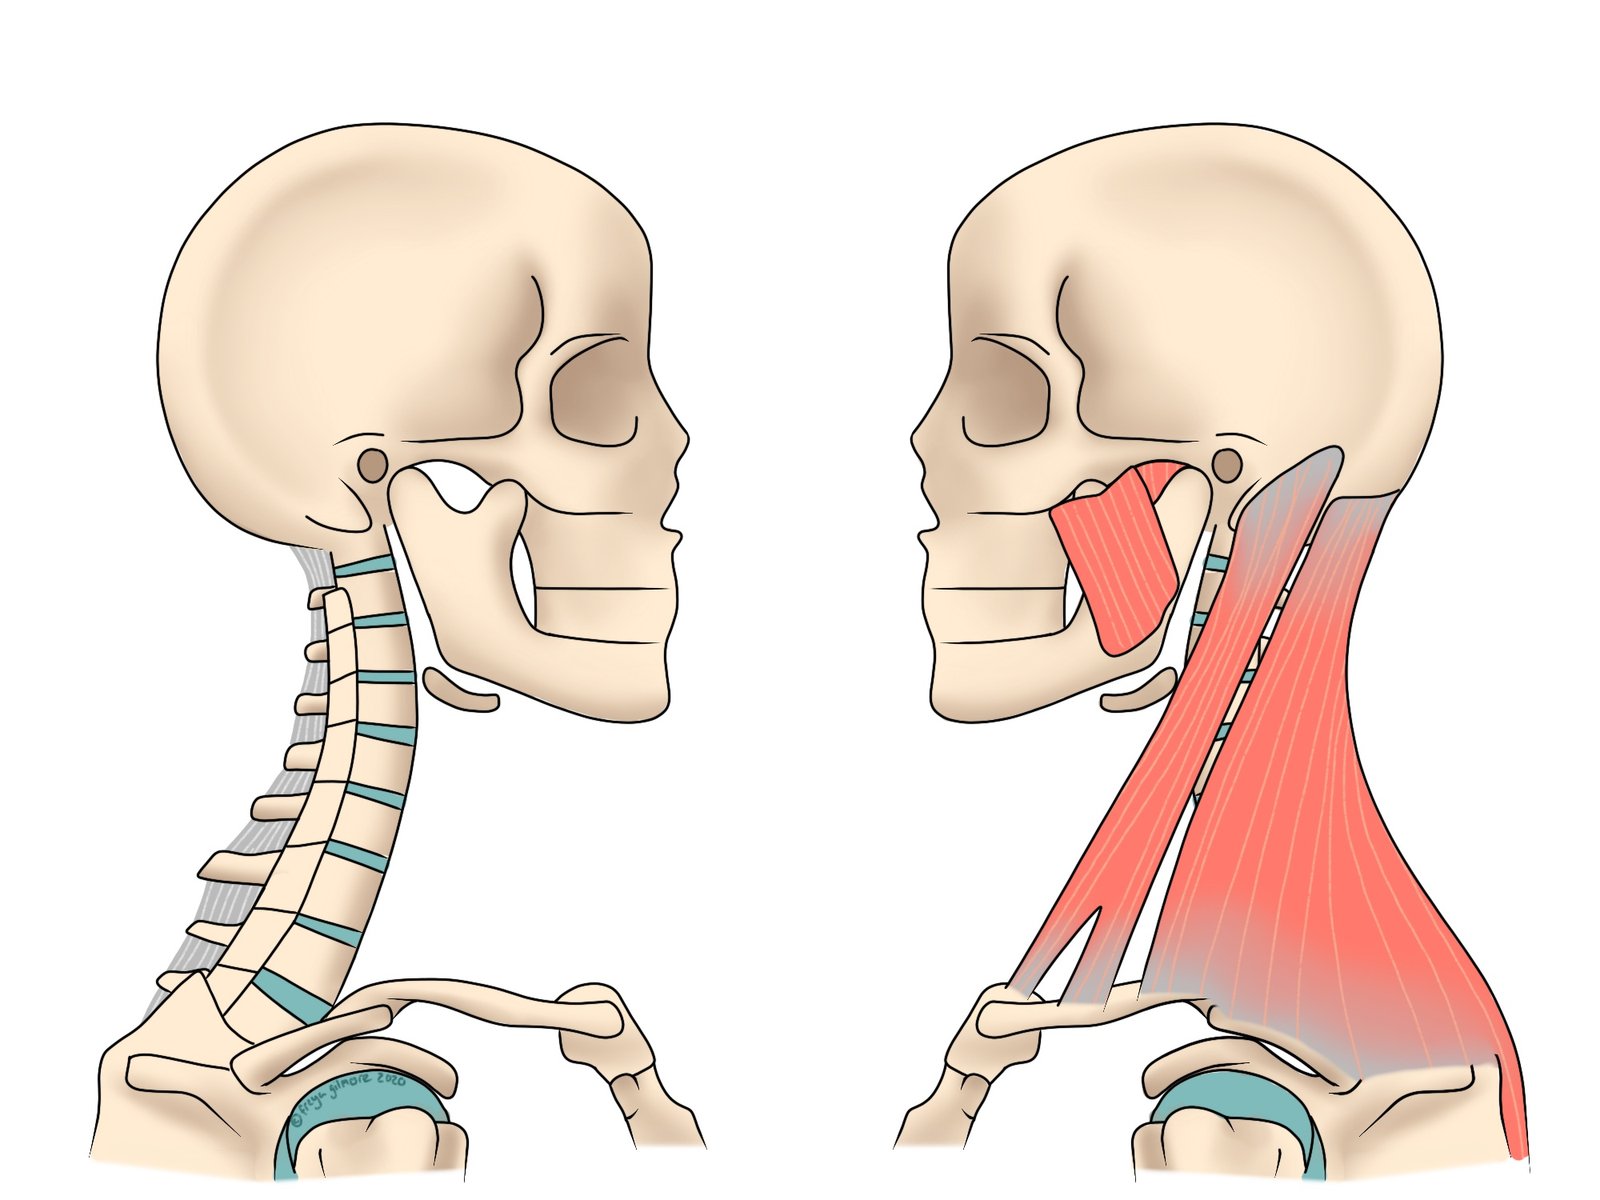 Soft tissues and bones involved in neck pain